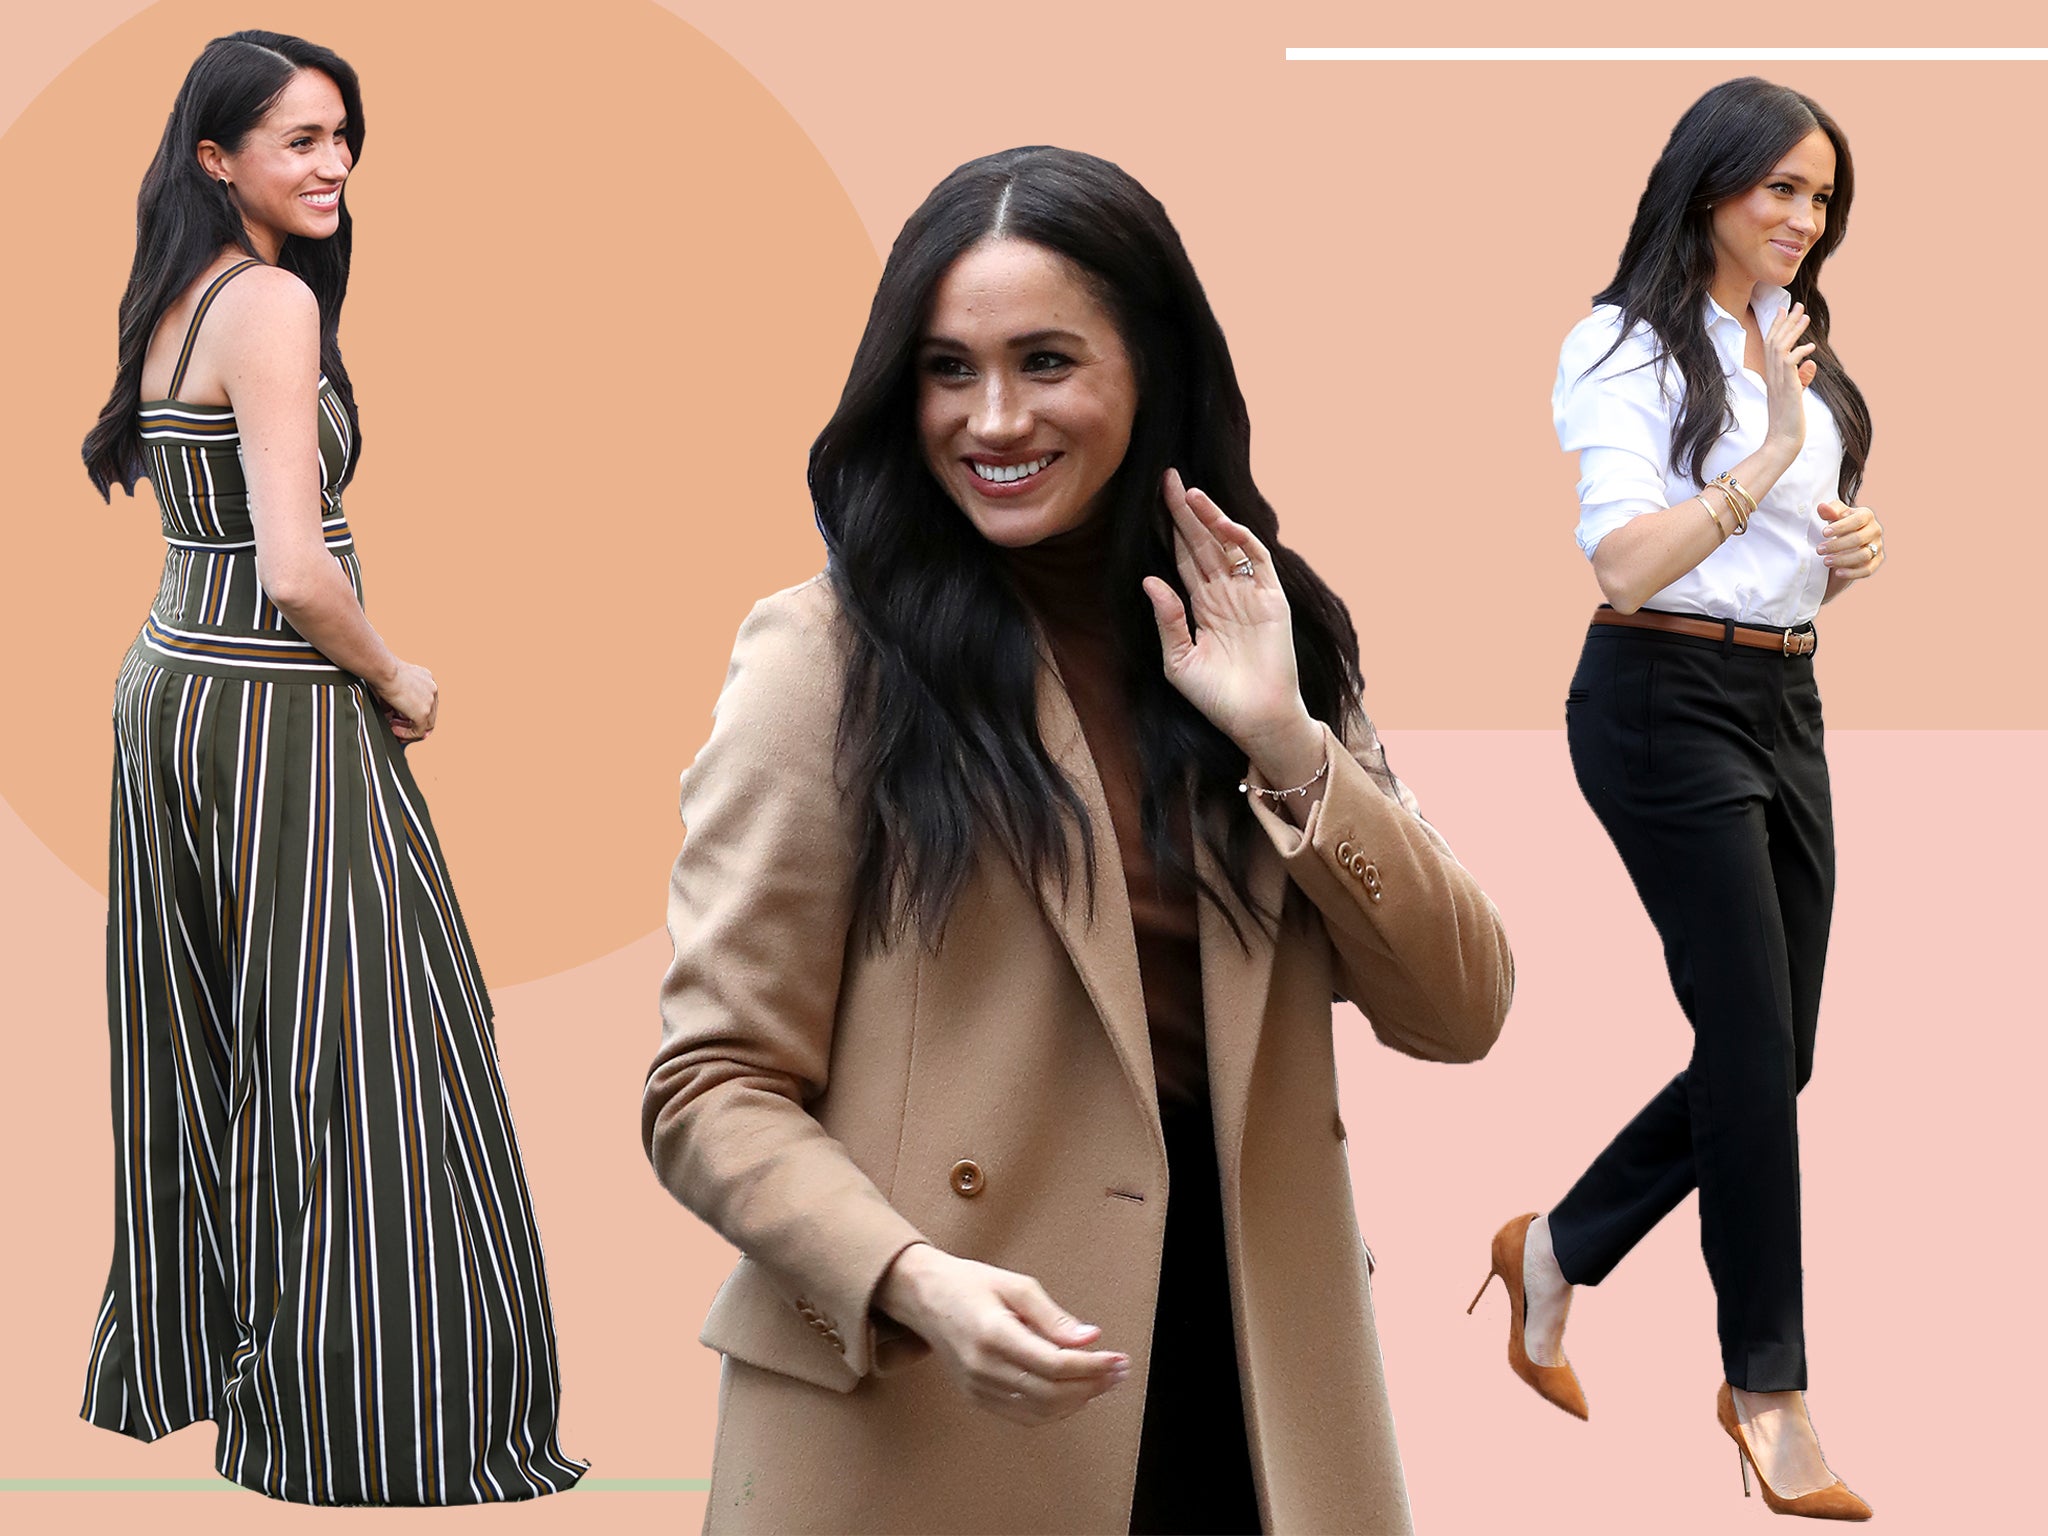 The Kate Middleton style choices which took inspiration from Meghan Markle  - pictures